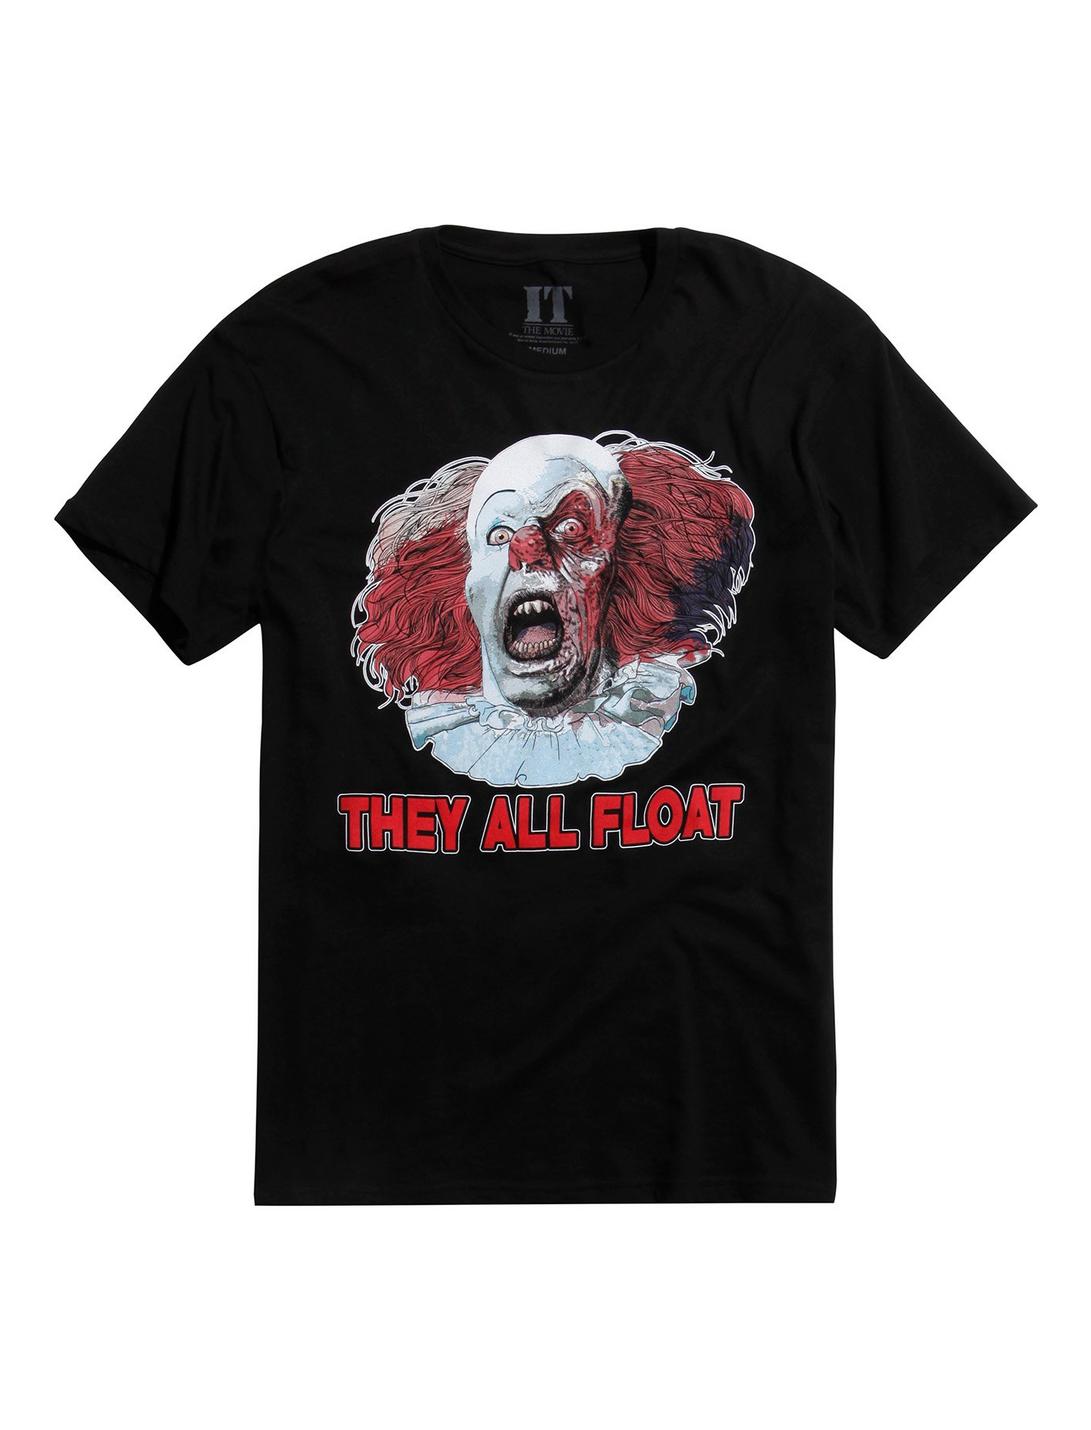 IT Pennywise They All Float T-Shirt, BLACK, hi-res